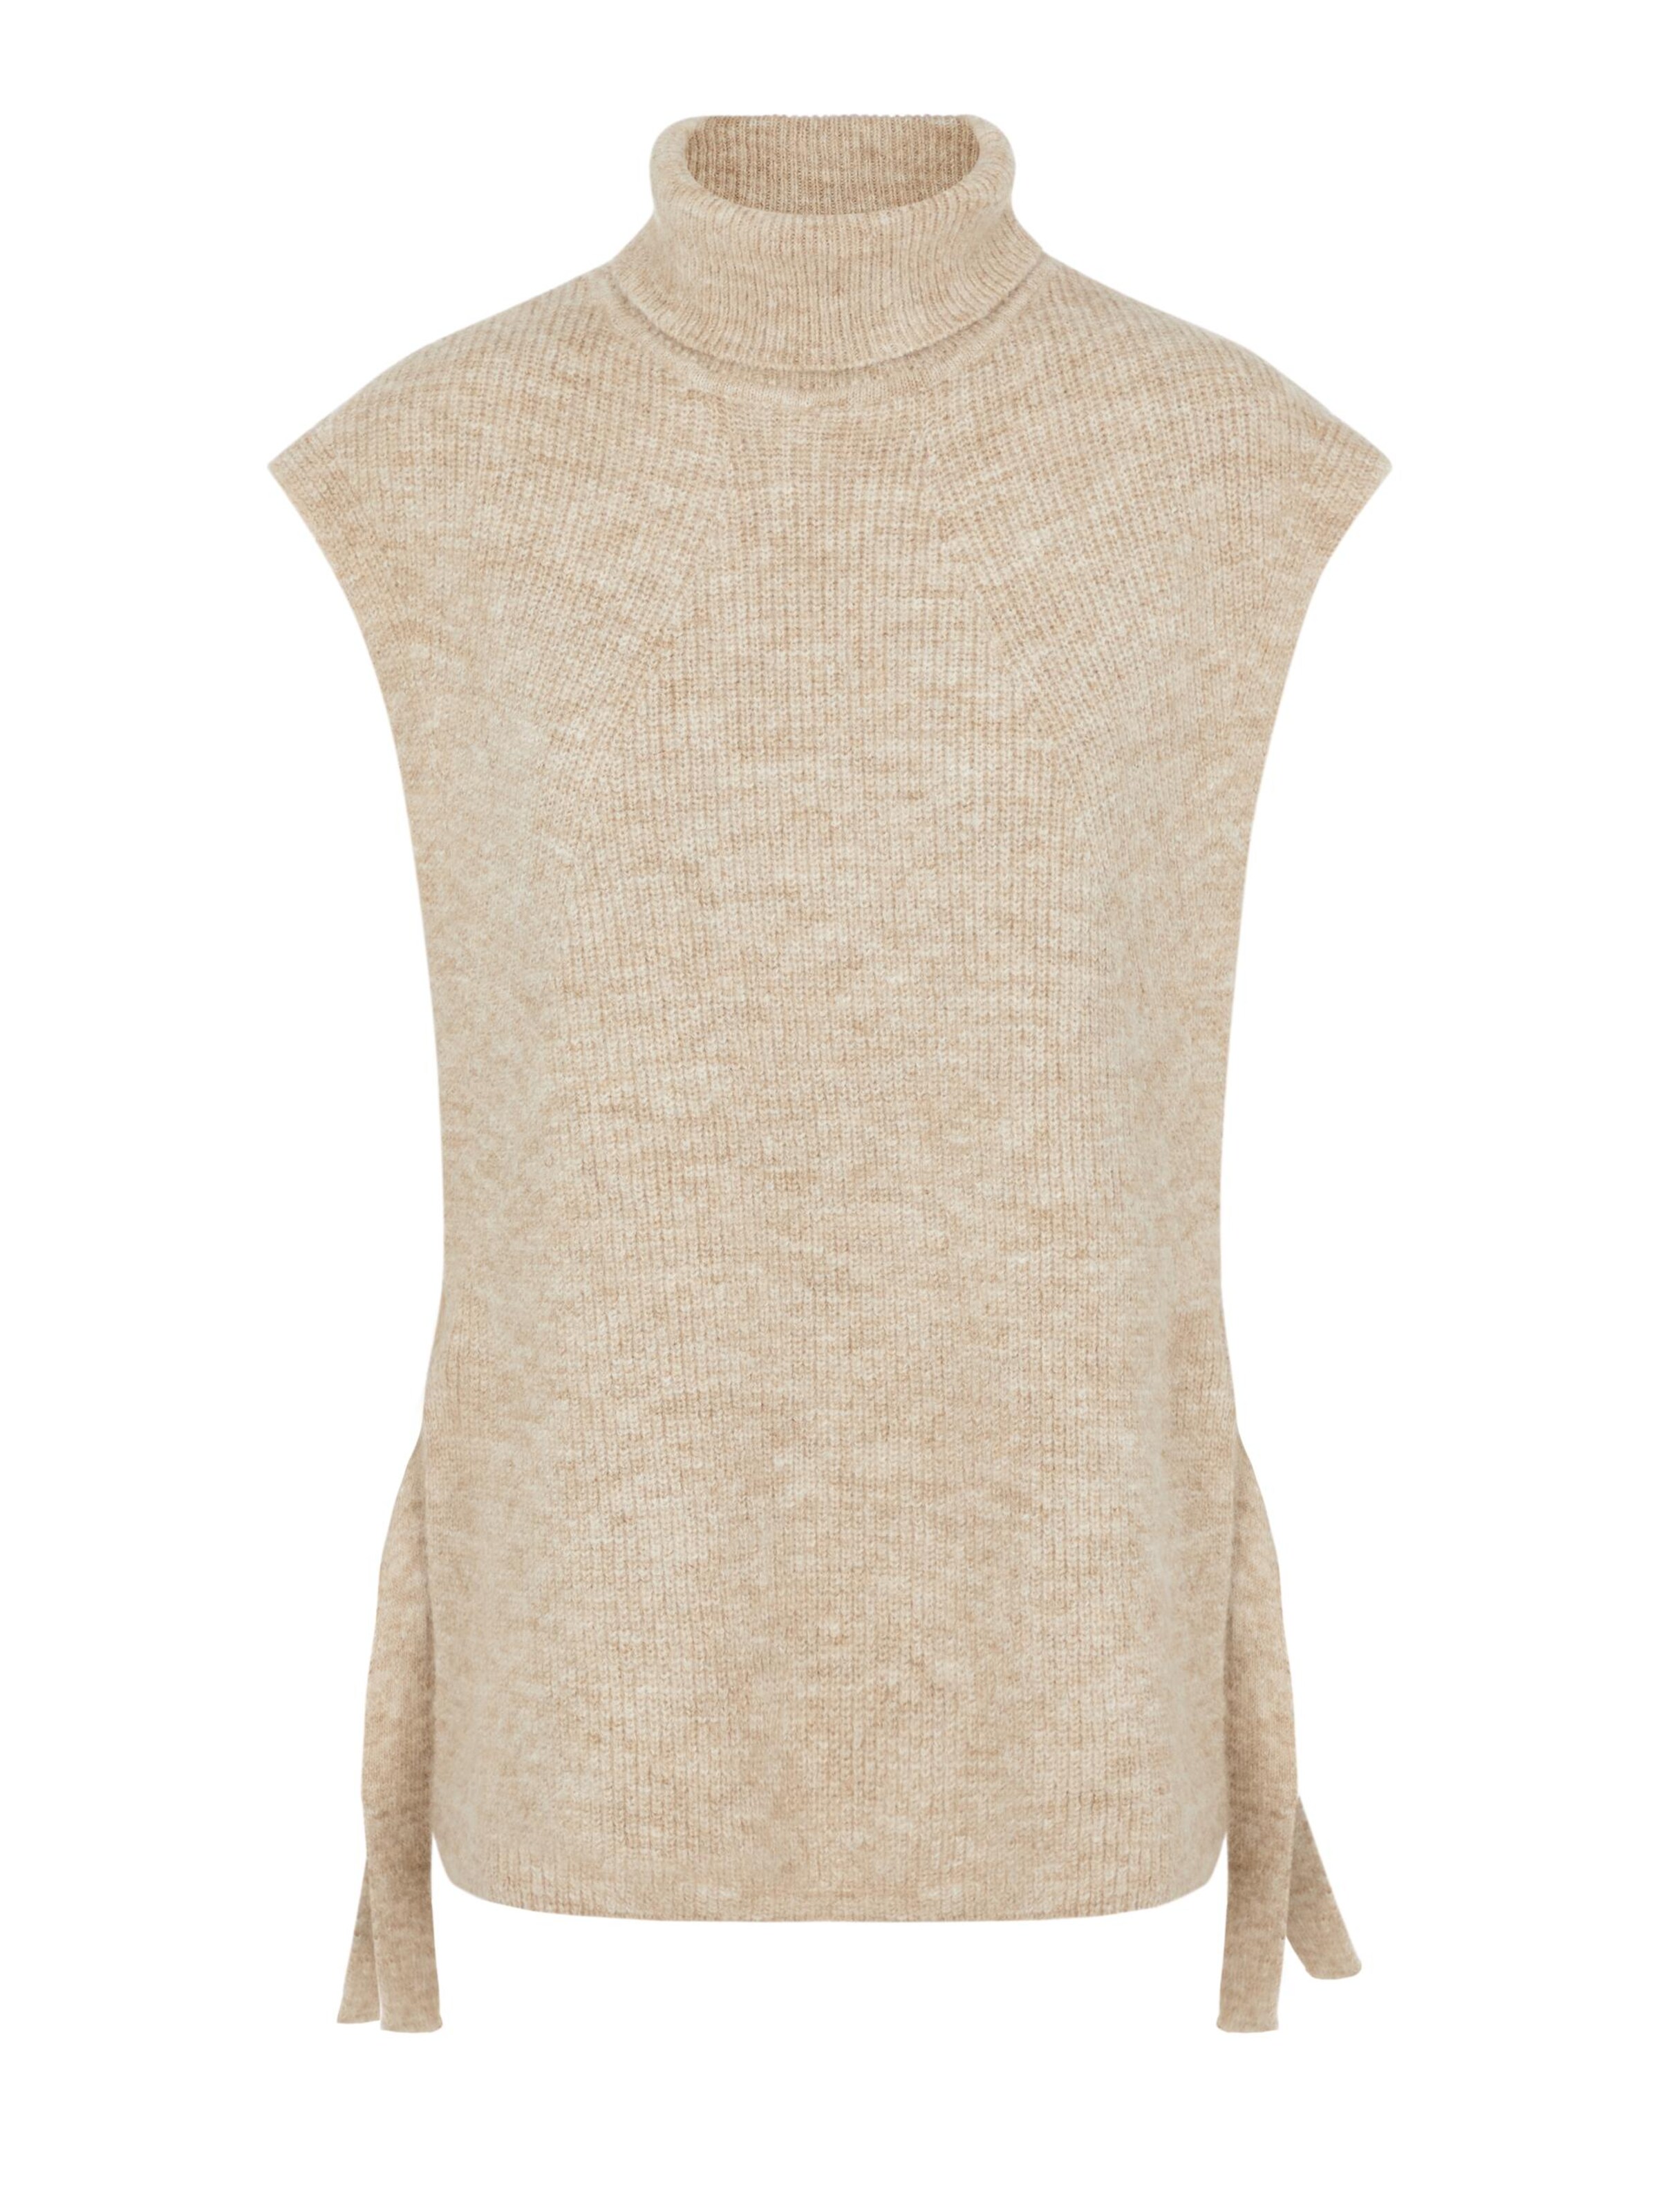 Femme Pull-over 'Marina' Y.A.S en Gris Clair 